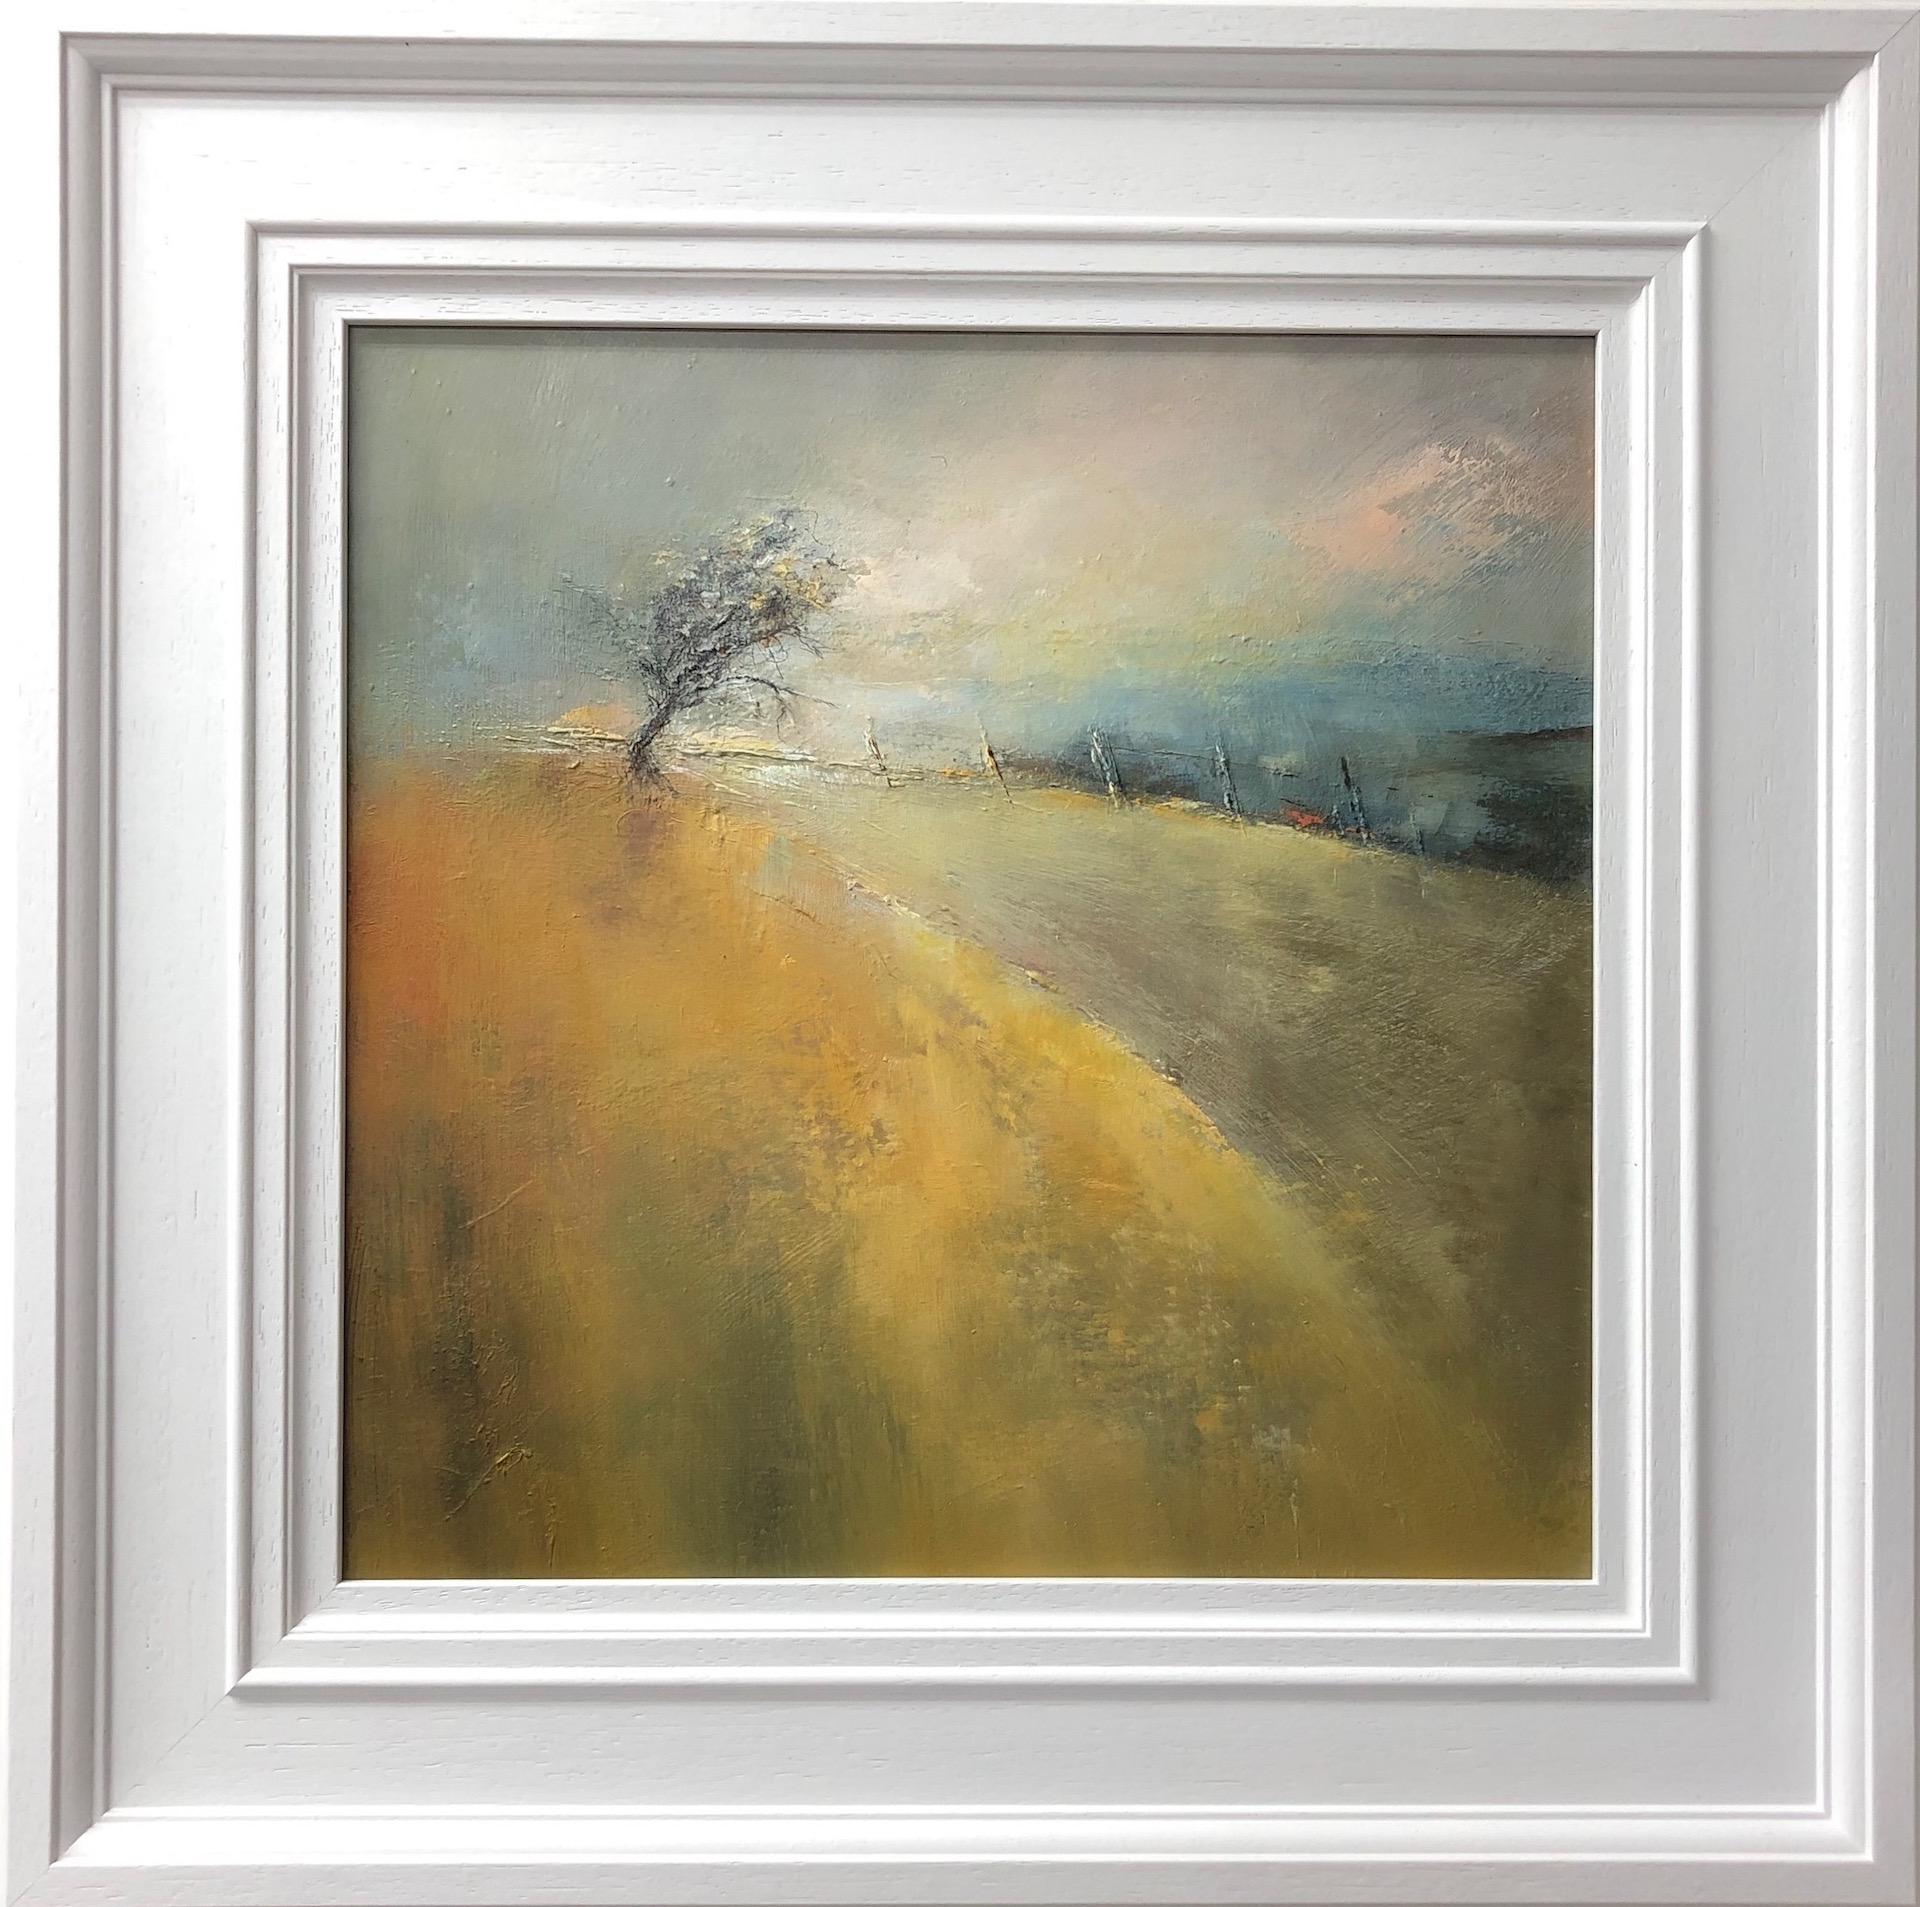 Shirley Kirkcaldy, Waiting for Spring, Original Landscape Painting, Natural Tree